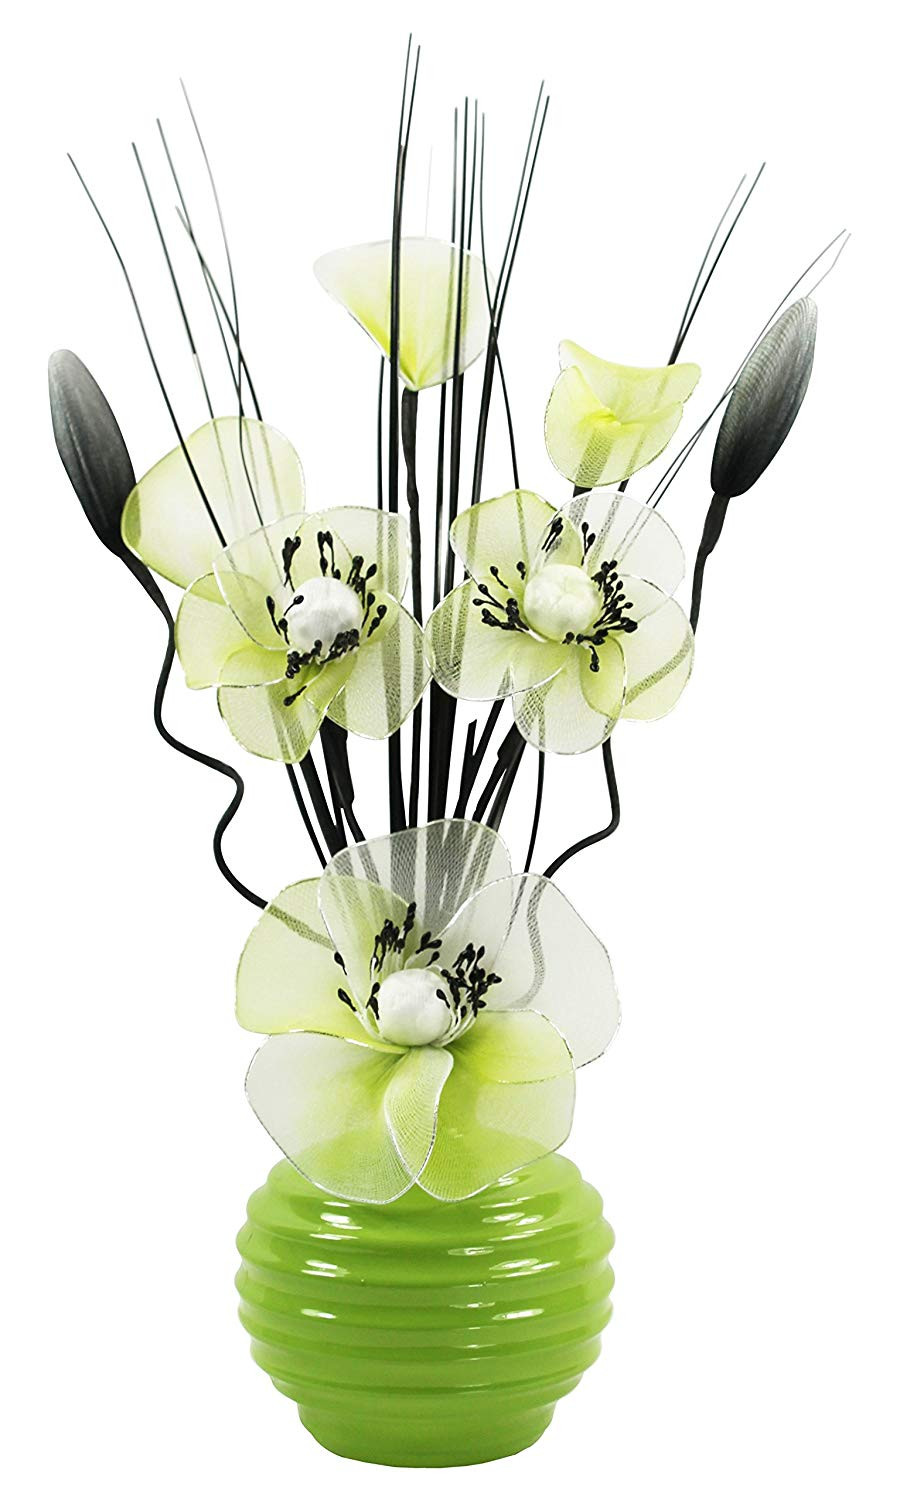 20 Fabulous Flowers In Vases Artificial Ones 2022 free download flowers in vases artificial ones of green vase with green and white artificial flowers ornaments for within green vase with green and white artificial flowers ornaments for living room windo